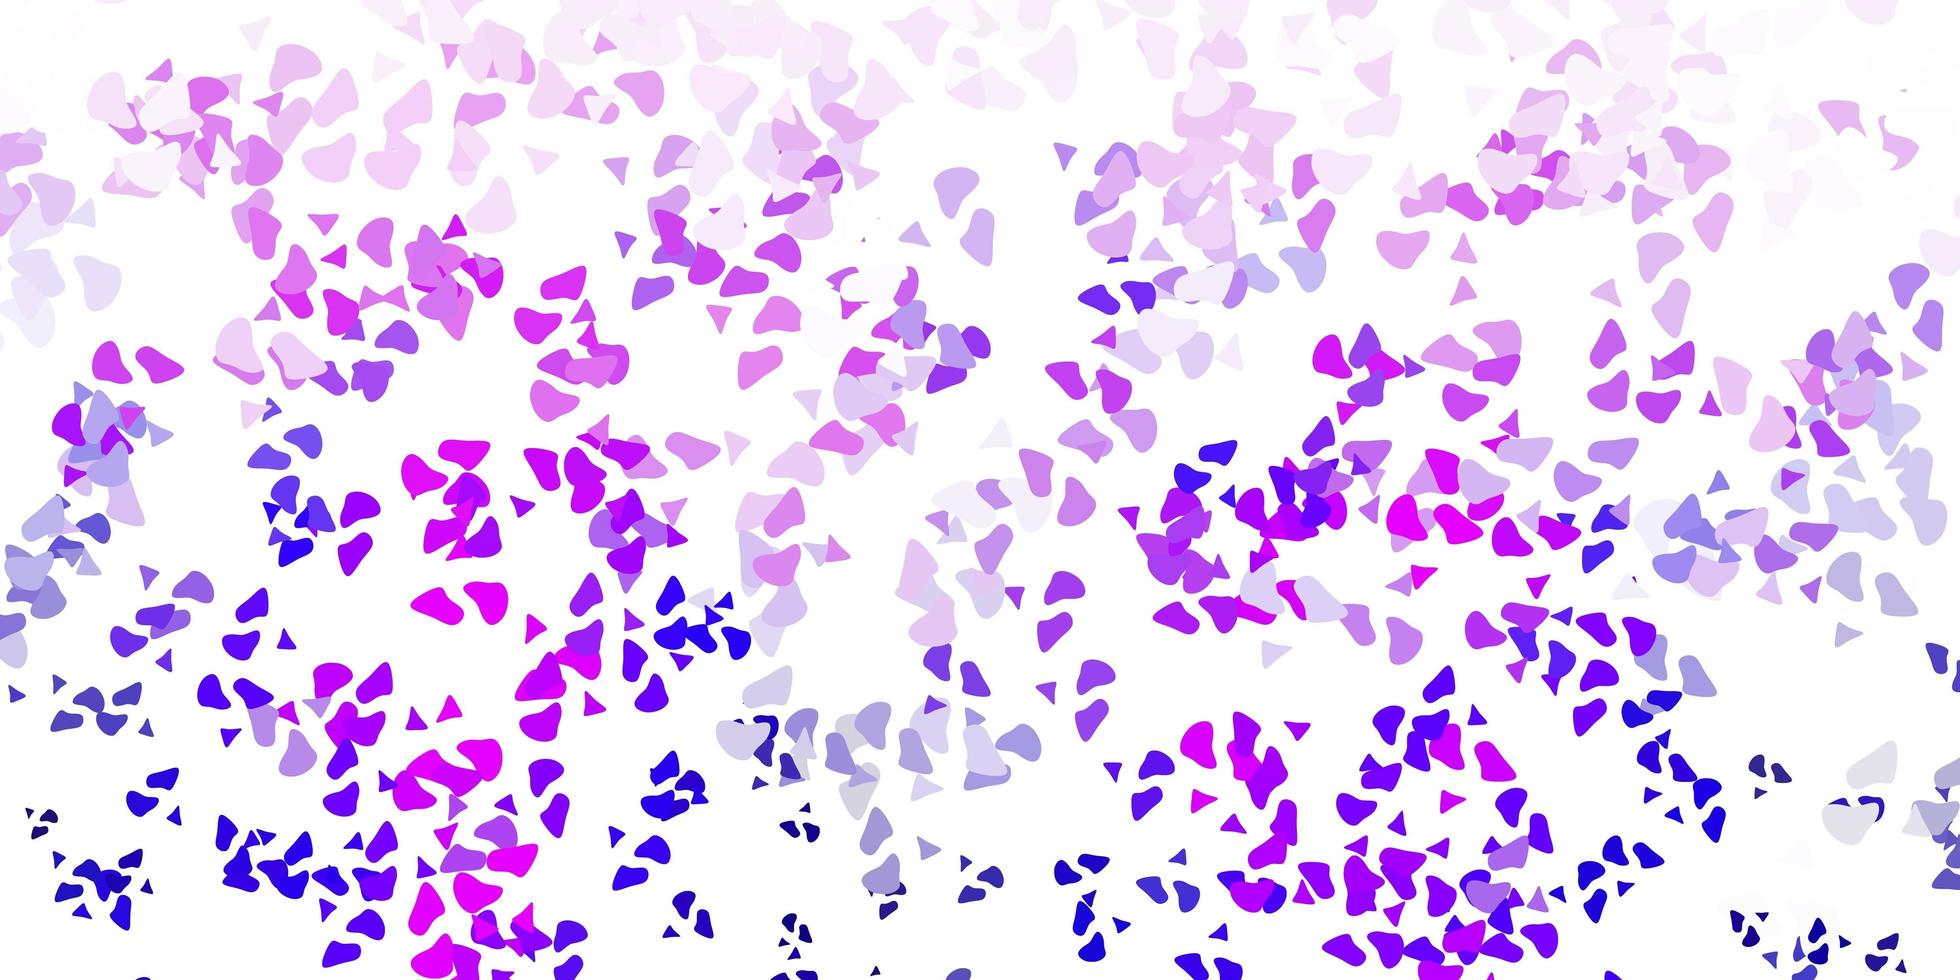 Light purple and pink texture with shapes. vector